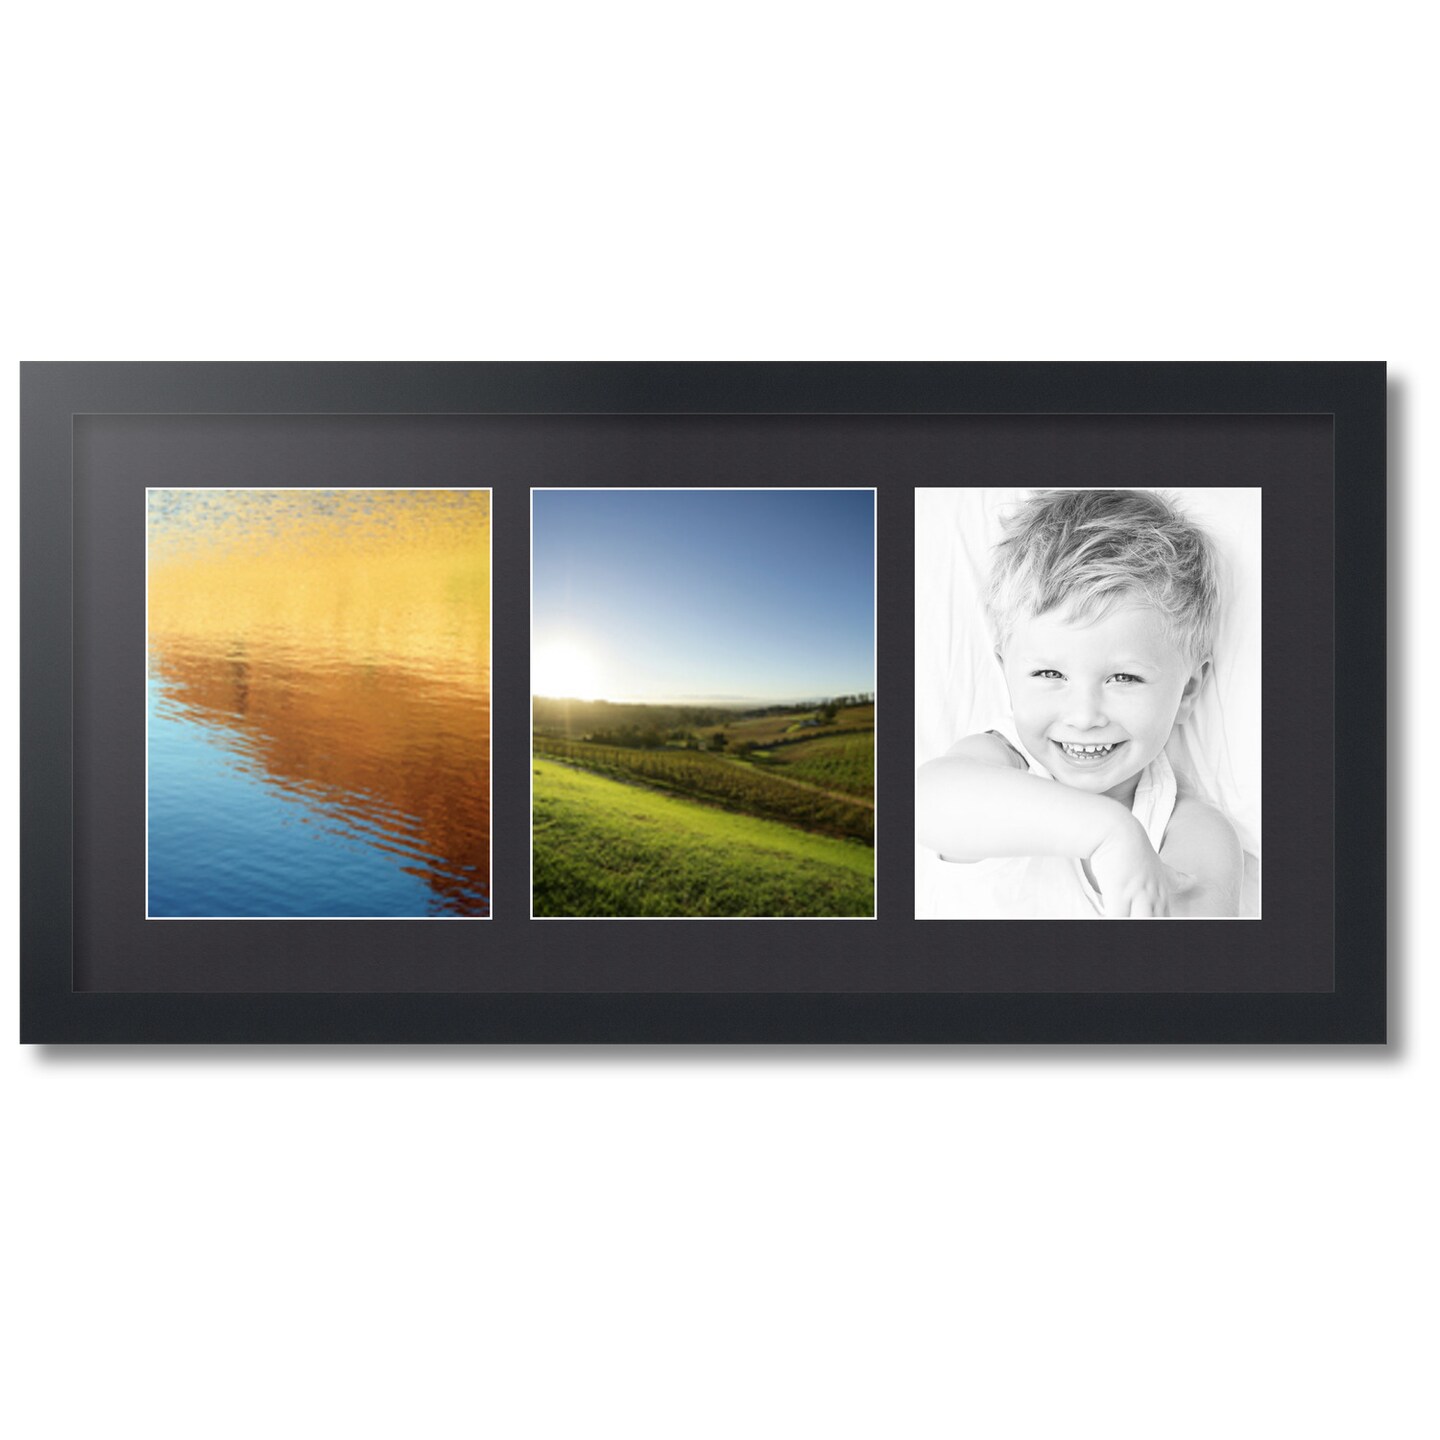 ArtToFrames Collage Photo Picture Frame with 3 - 8x10 inch Openings, Framed in Black with Over 62 Mat Color Options and Plexi Glass (CSM-3926-25)